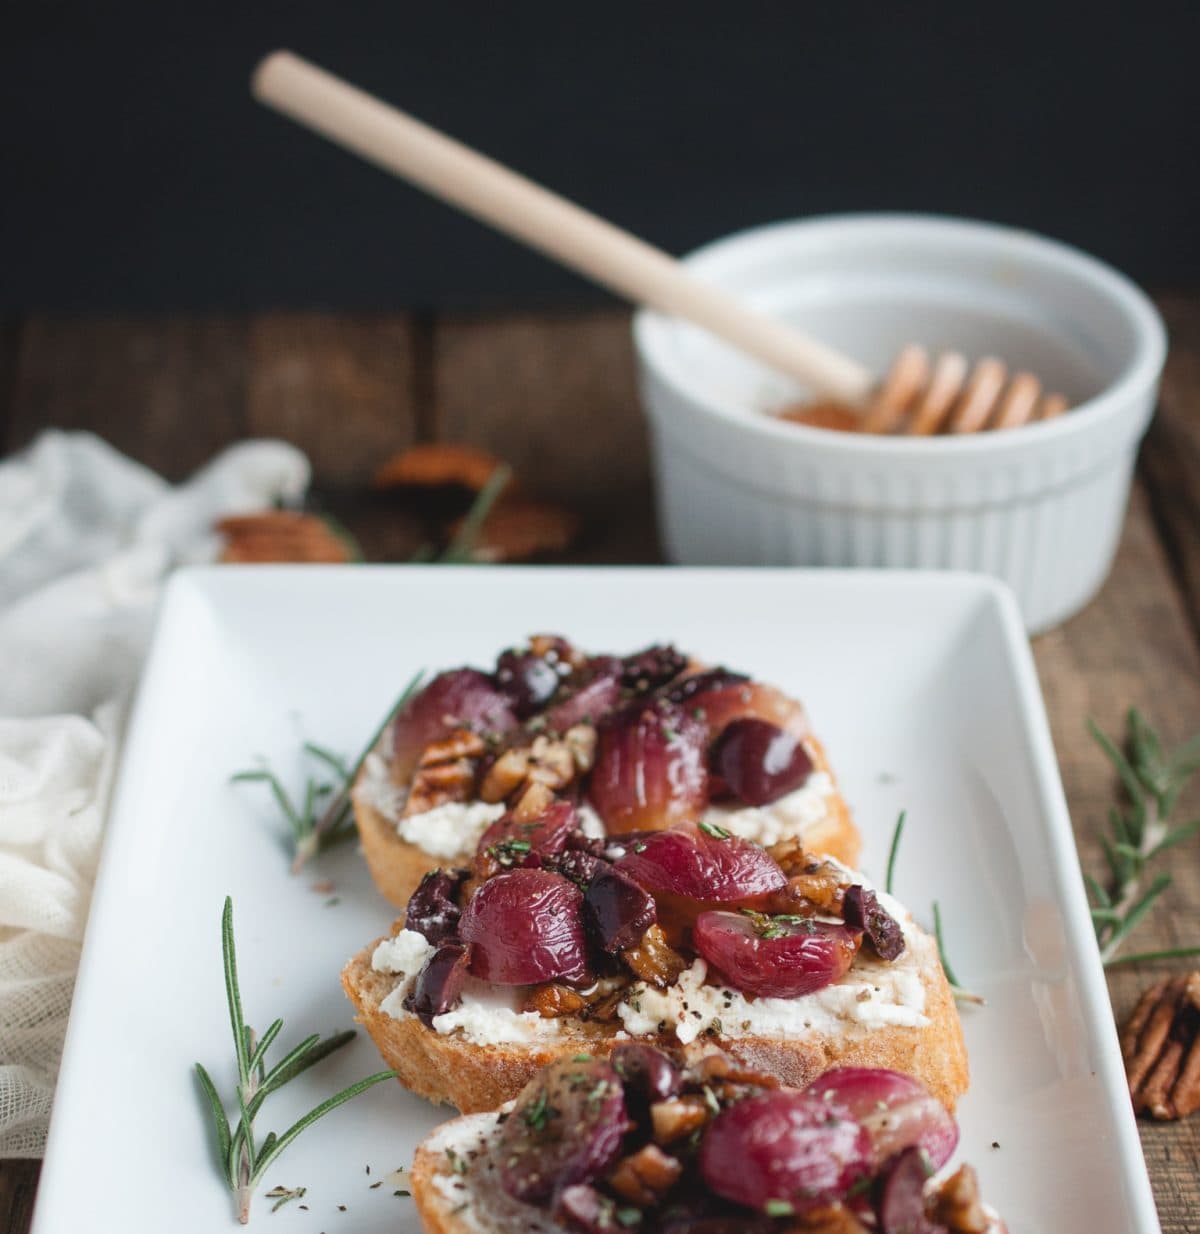 Picture of Crostini with Roasted Grapes on a wood backdrop with rosemary, honey, and pecan garnishes